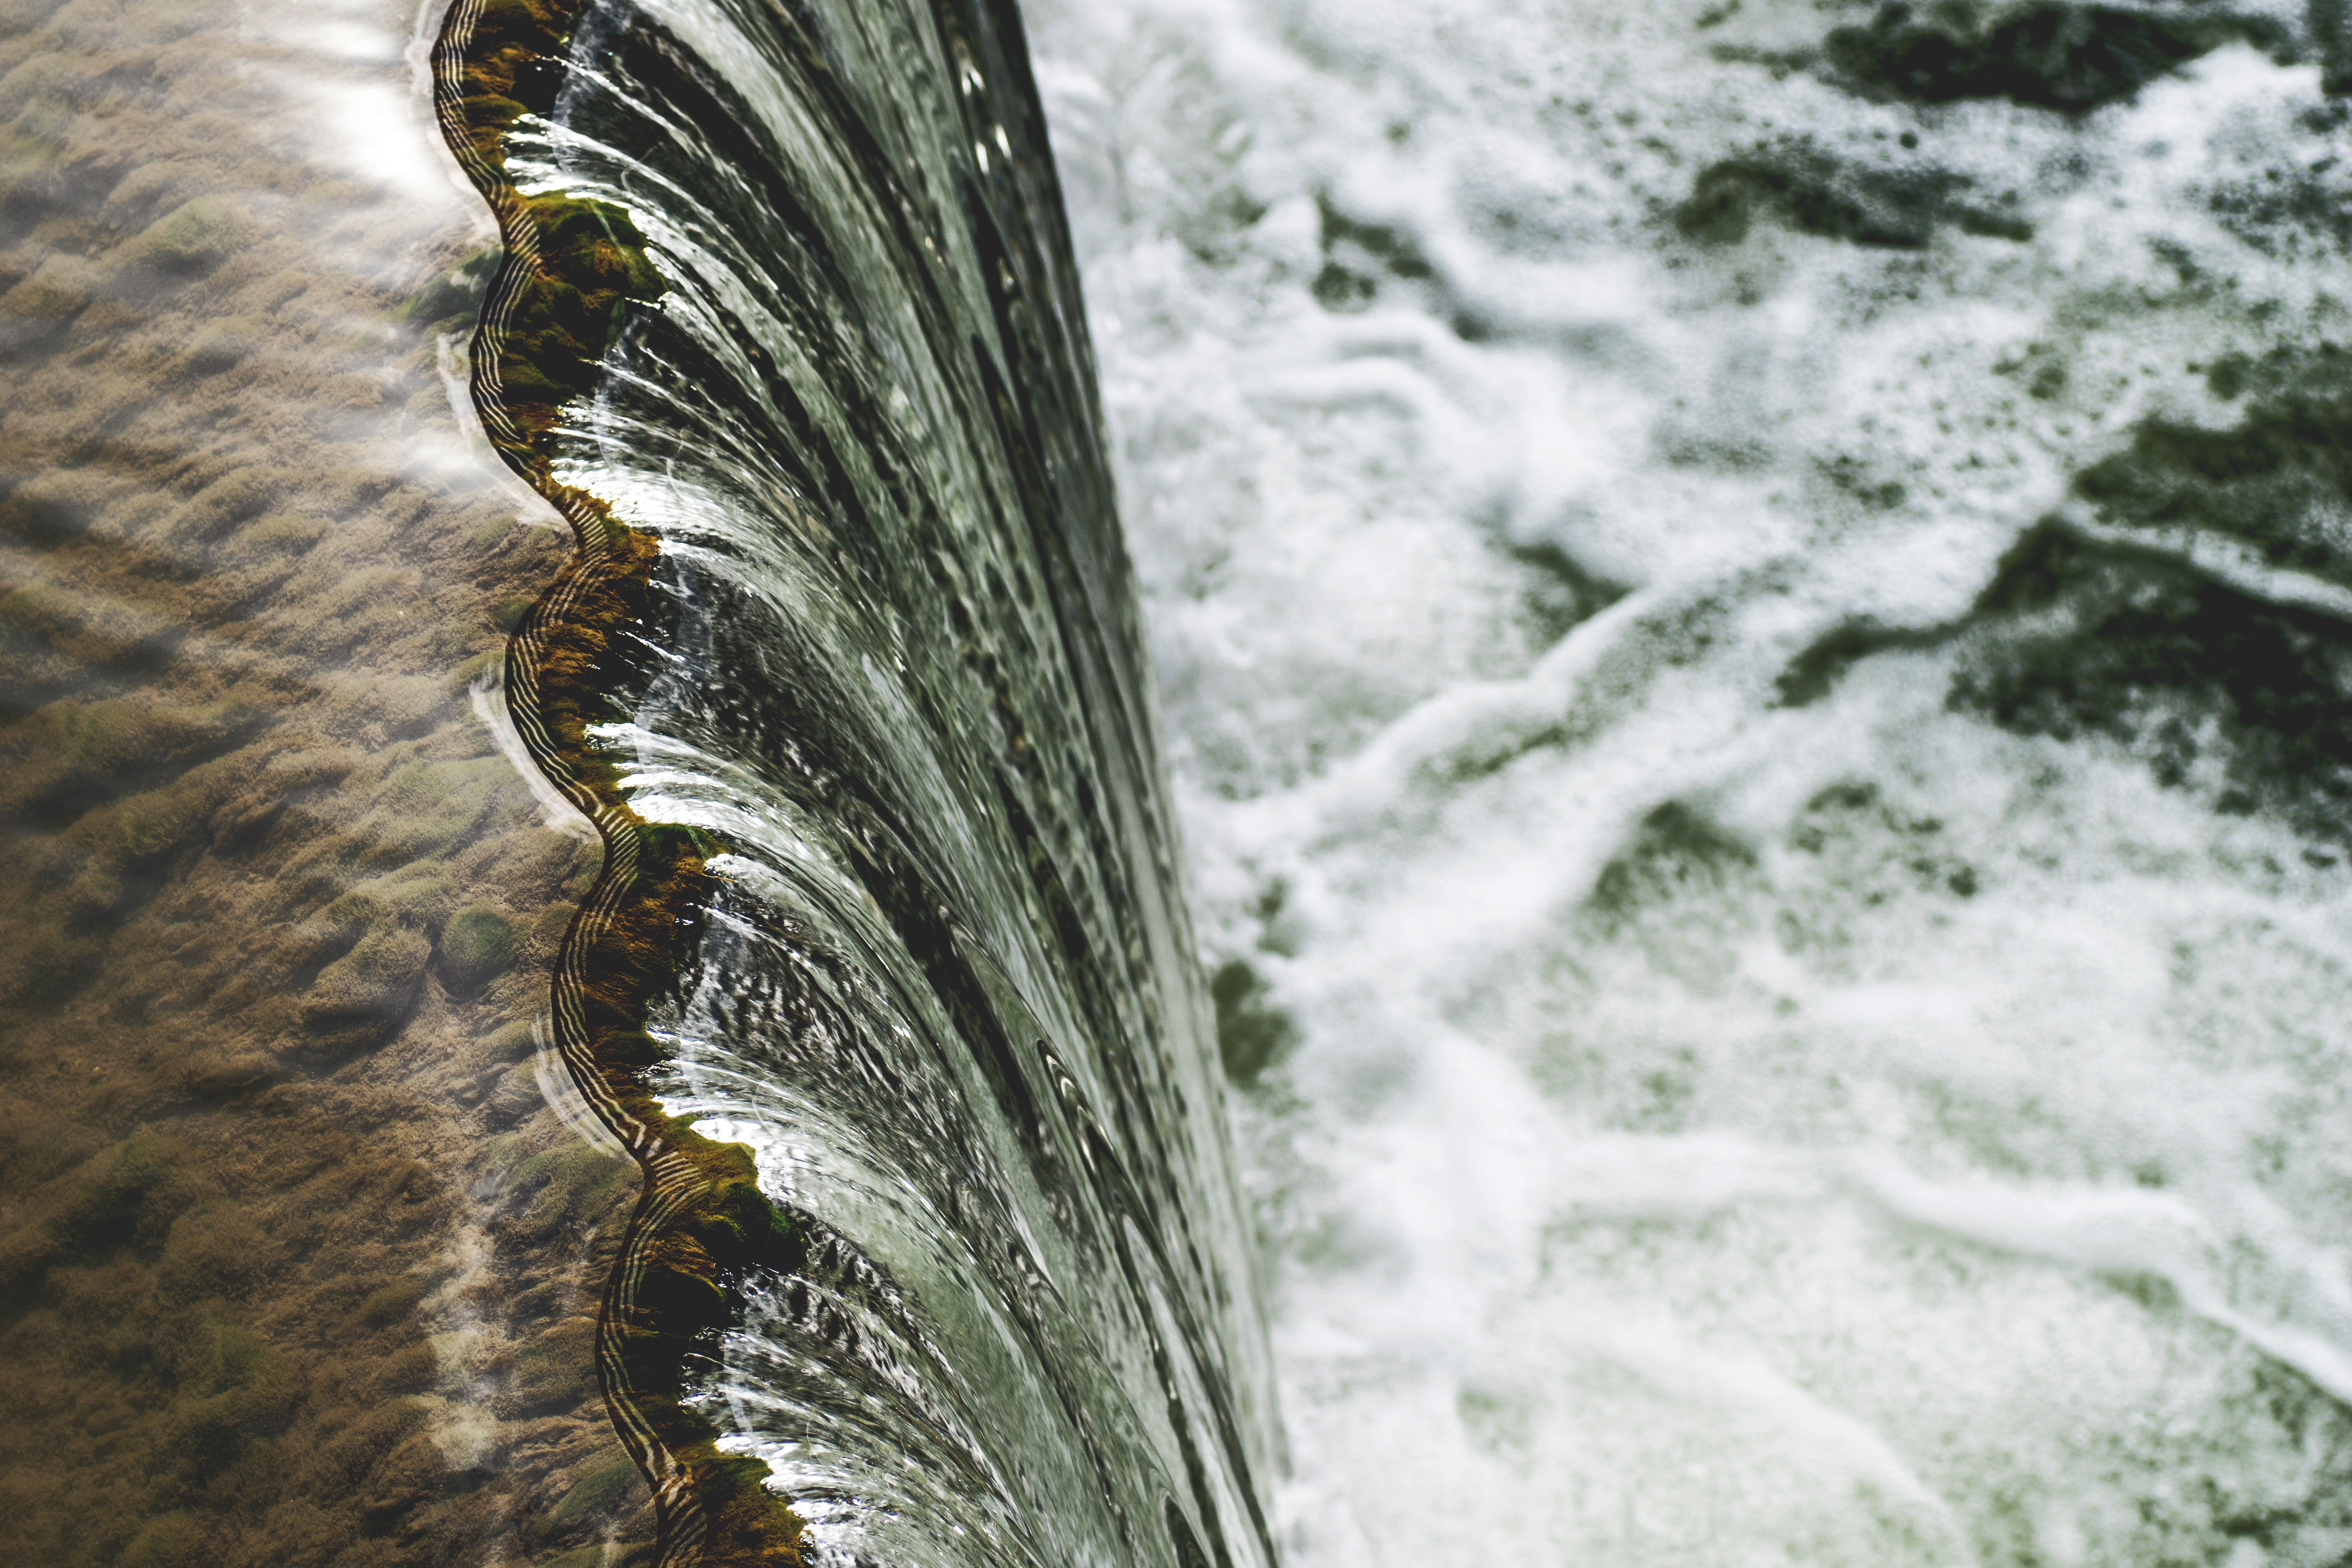 Migratory salmonid fish and dams – Do they mix?